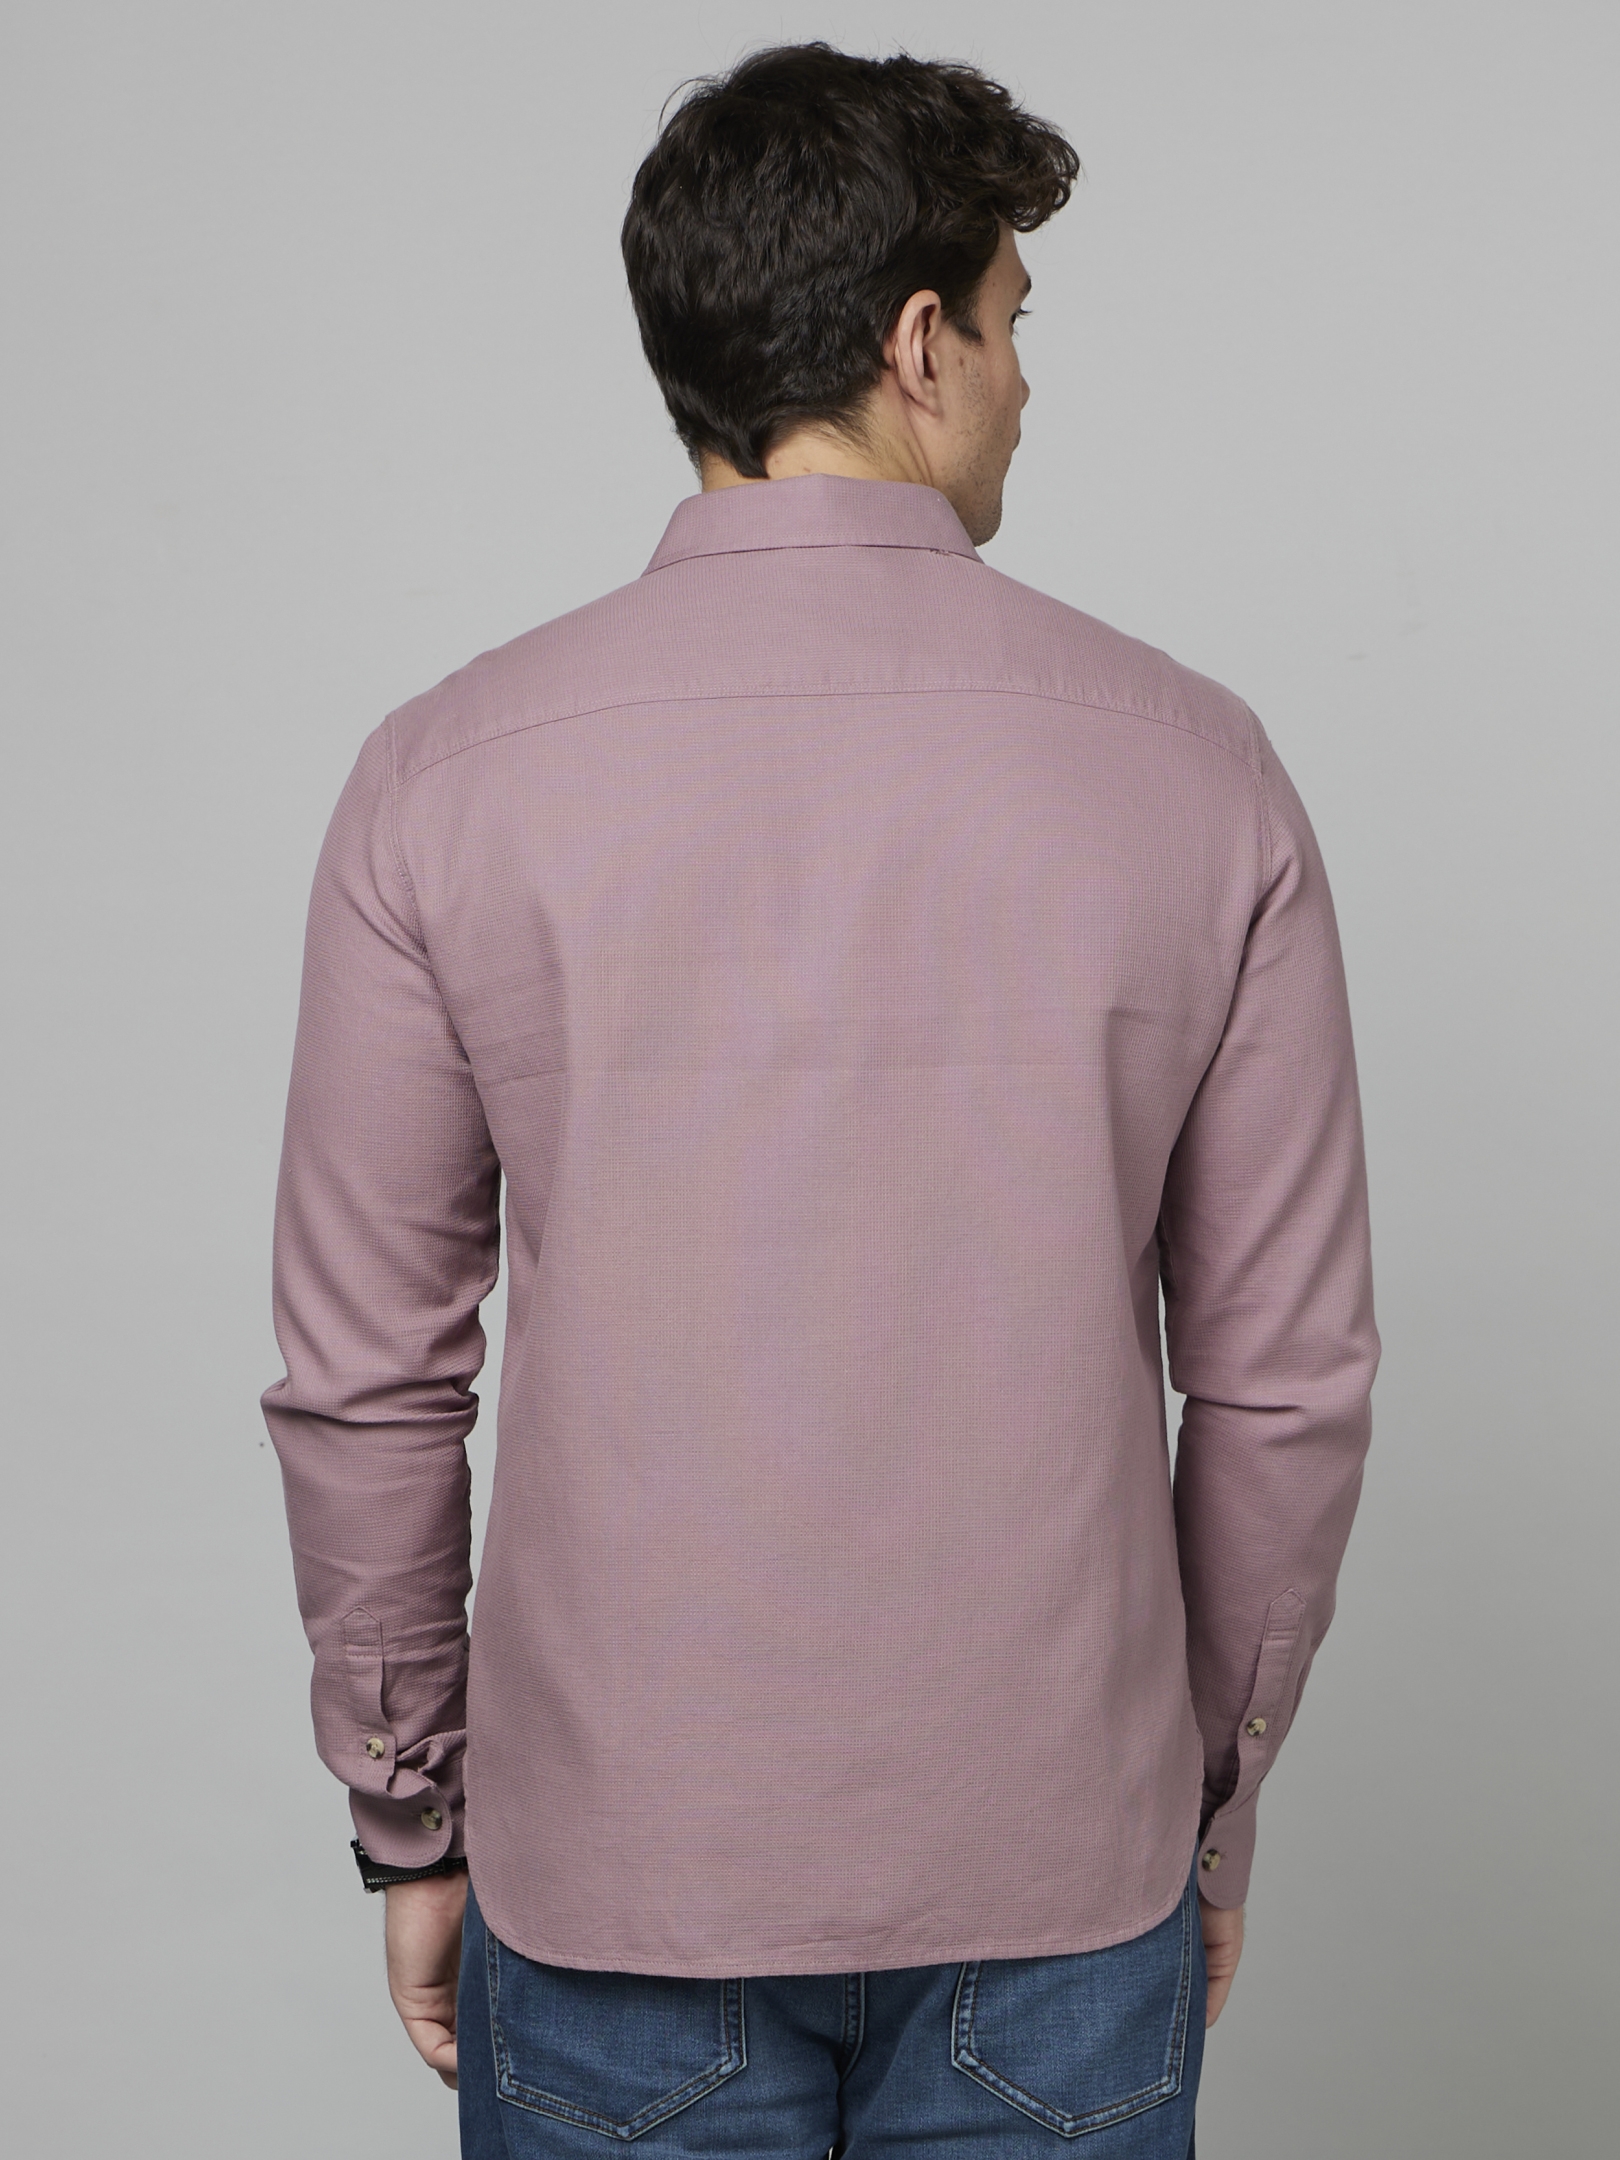 Men's Purple Solid Casual Shirts